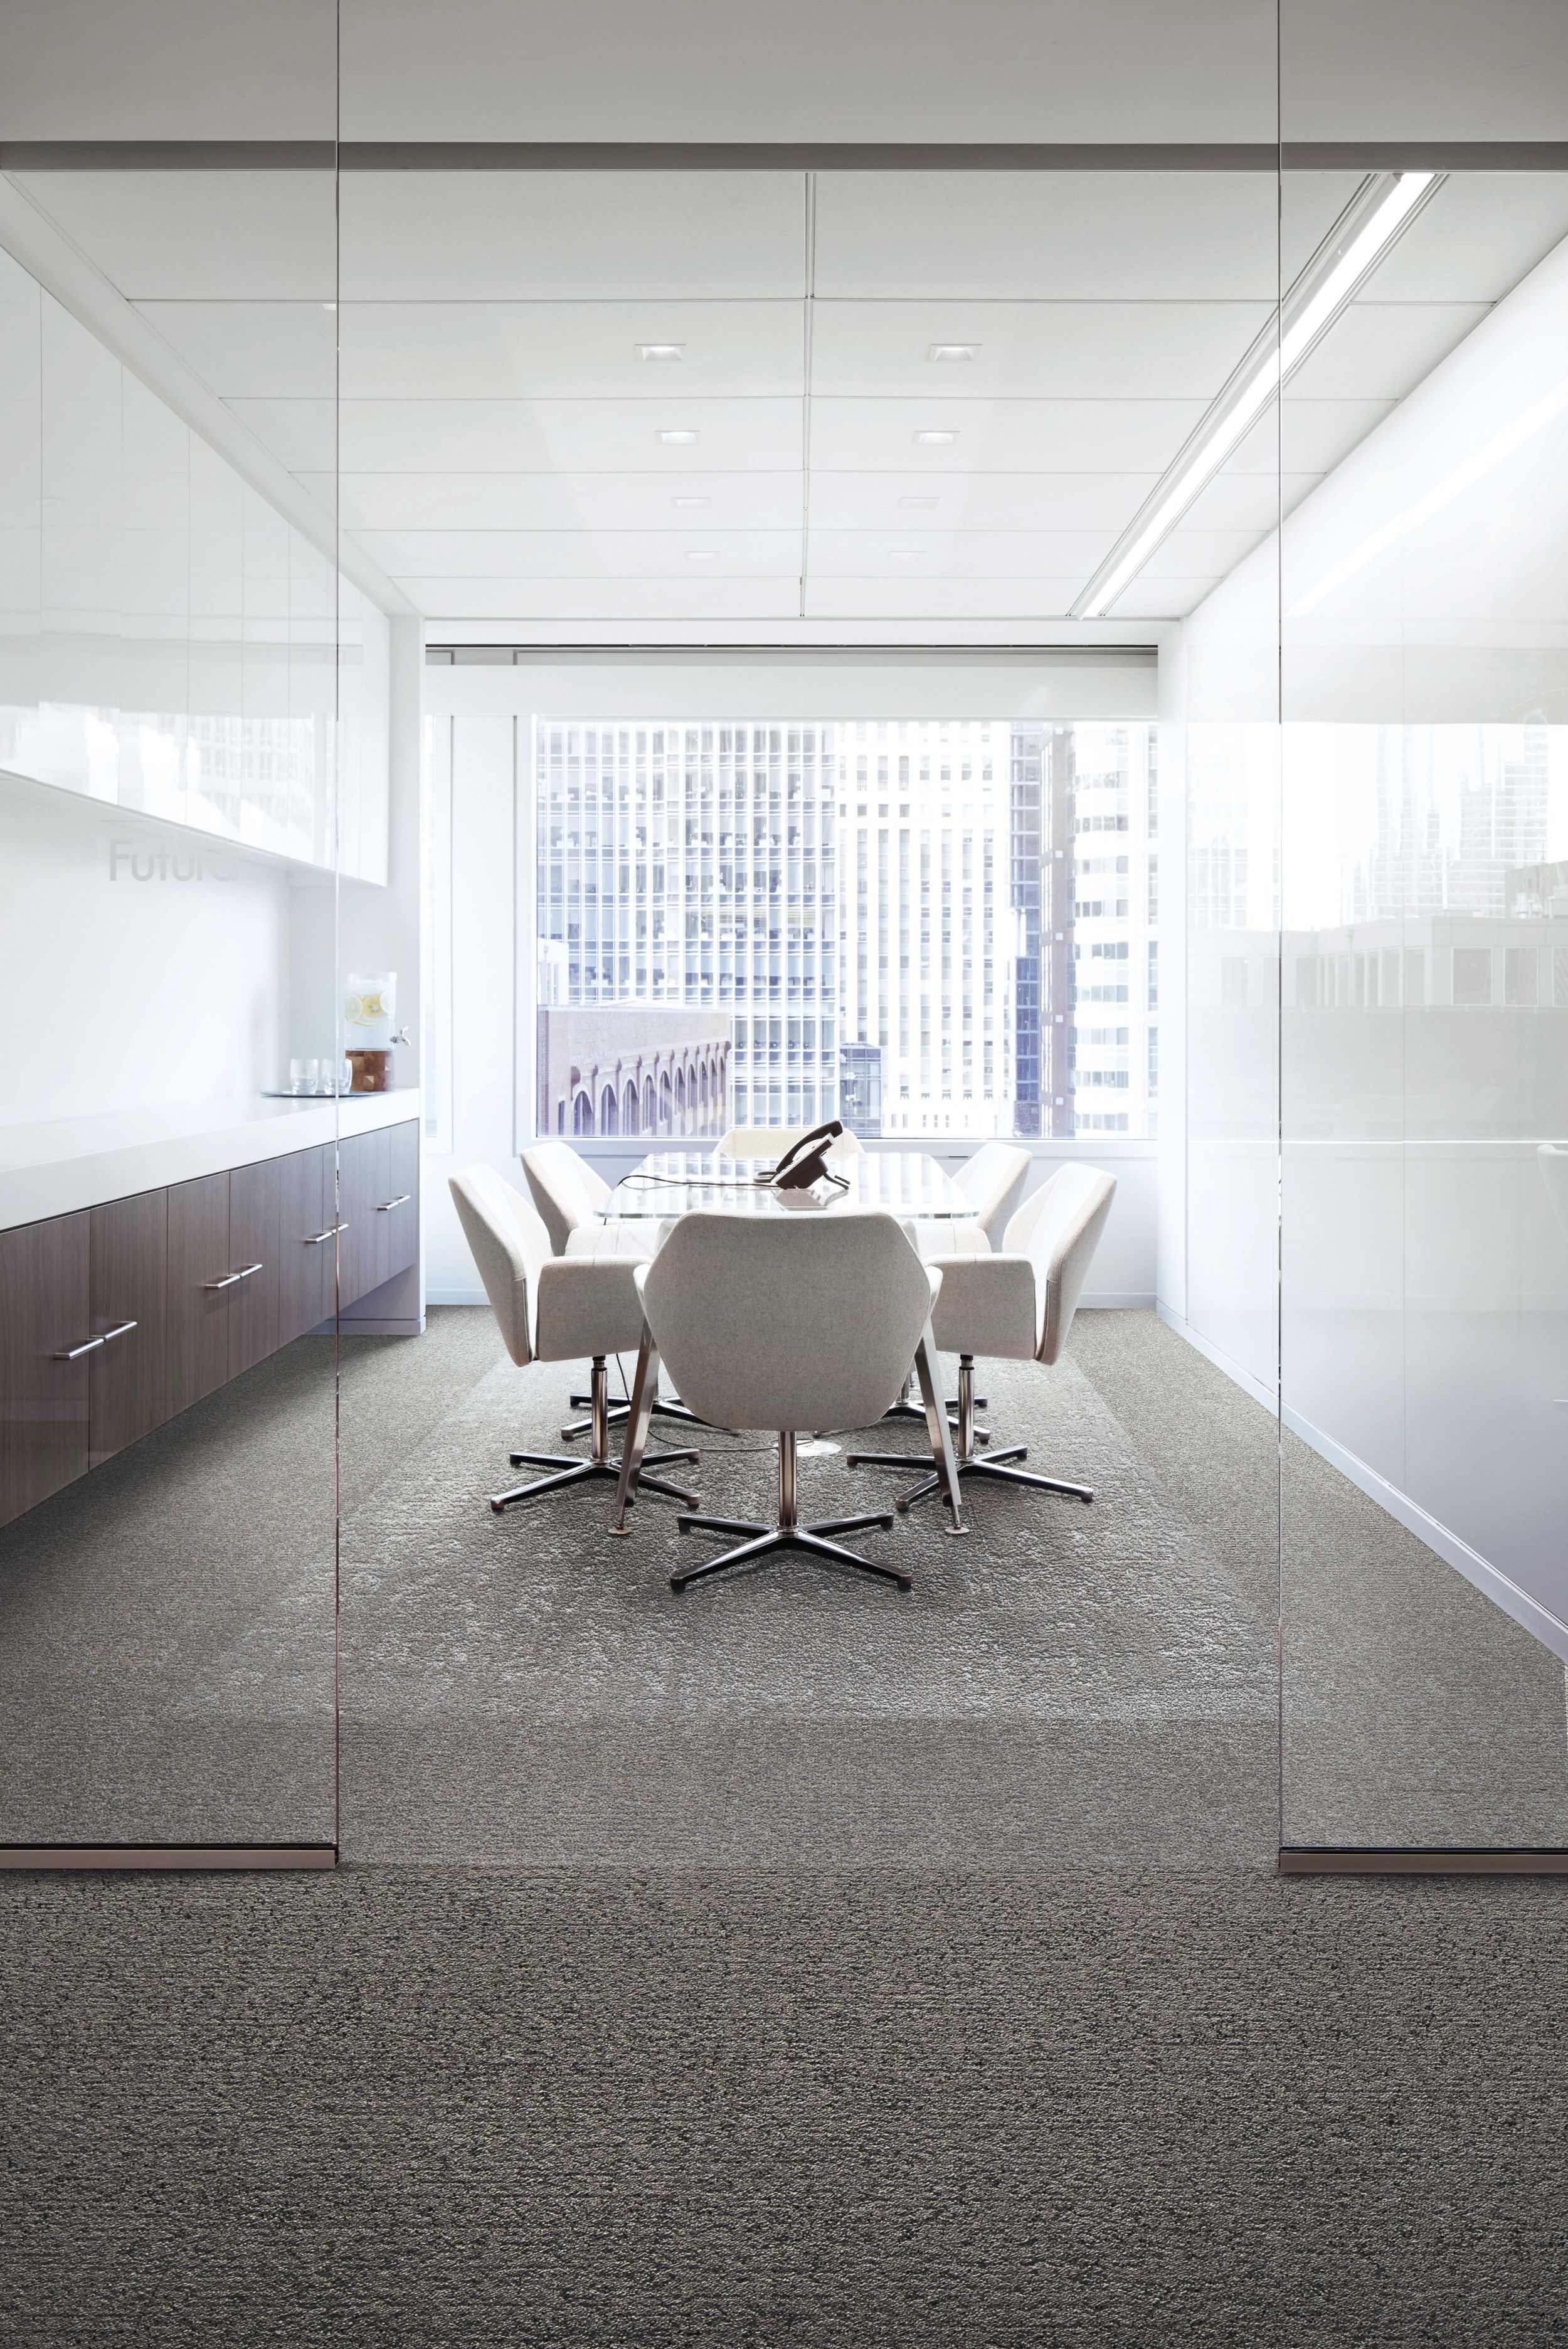 Interface Edge, Shed and Riverwalk carpet tiles in meeting room with glass door and office buildings in background window image number 10